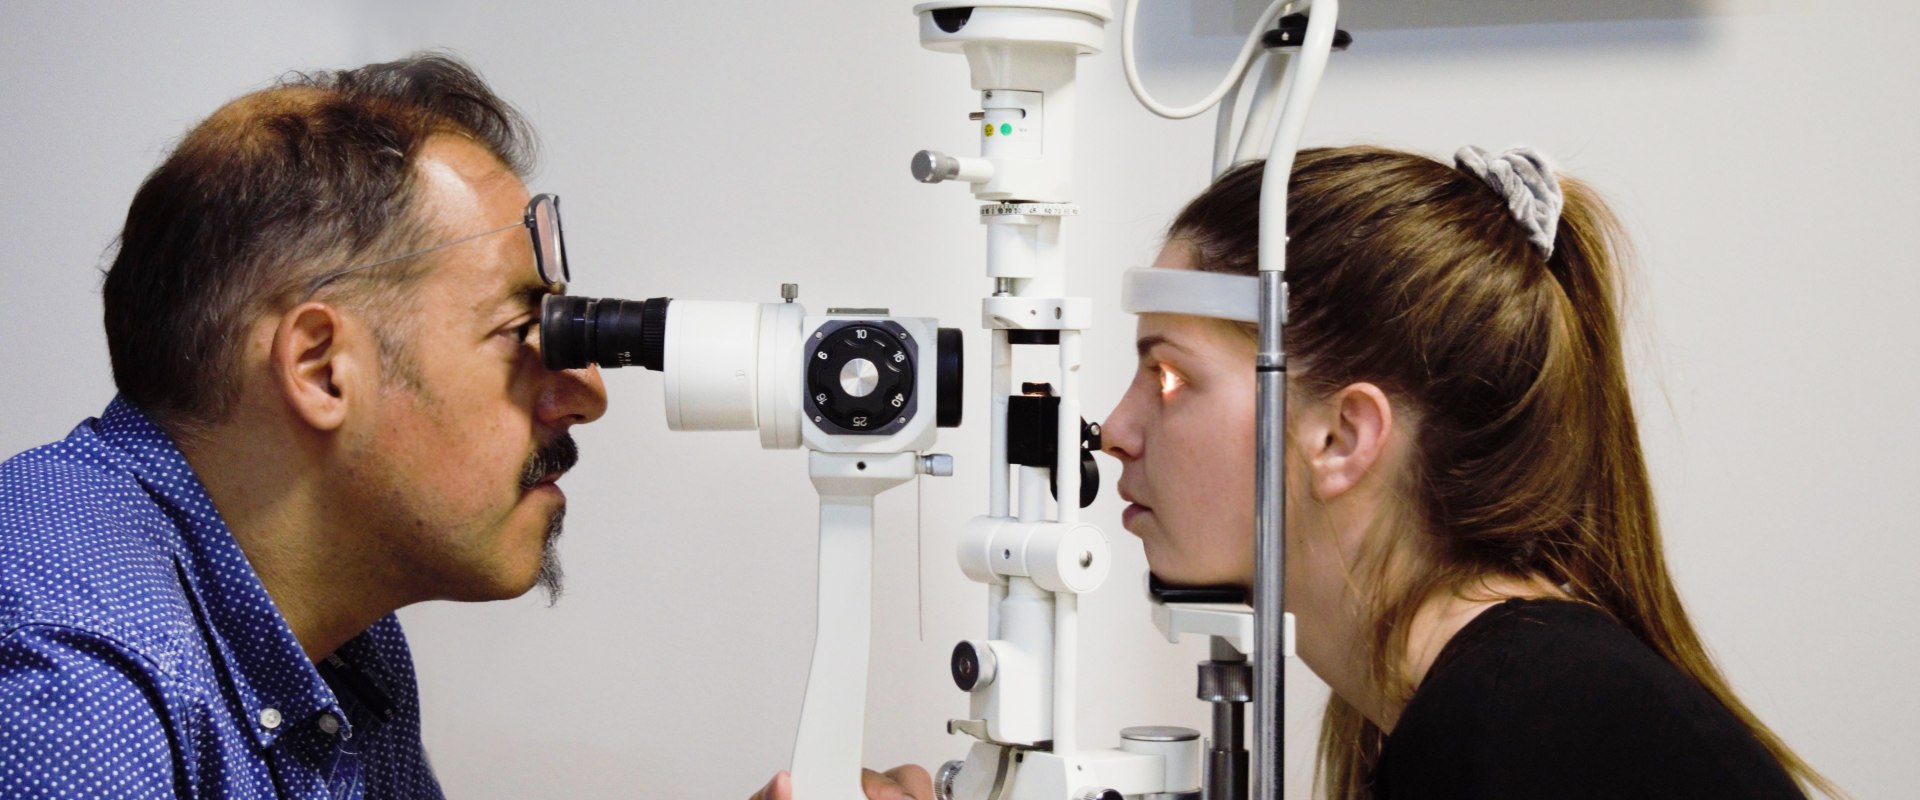 What should you look for in a slit lamp?